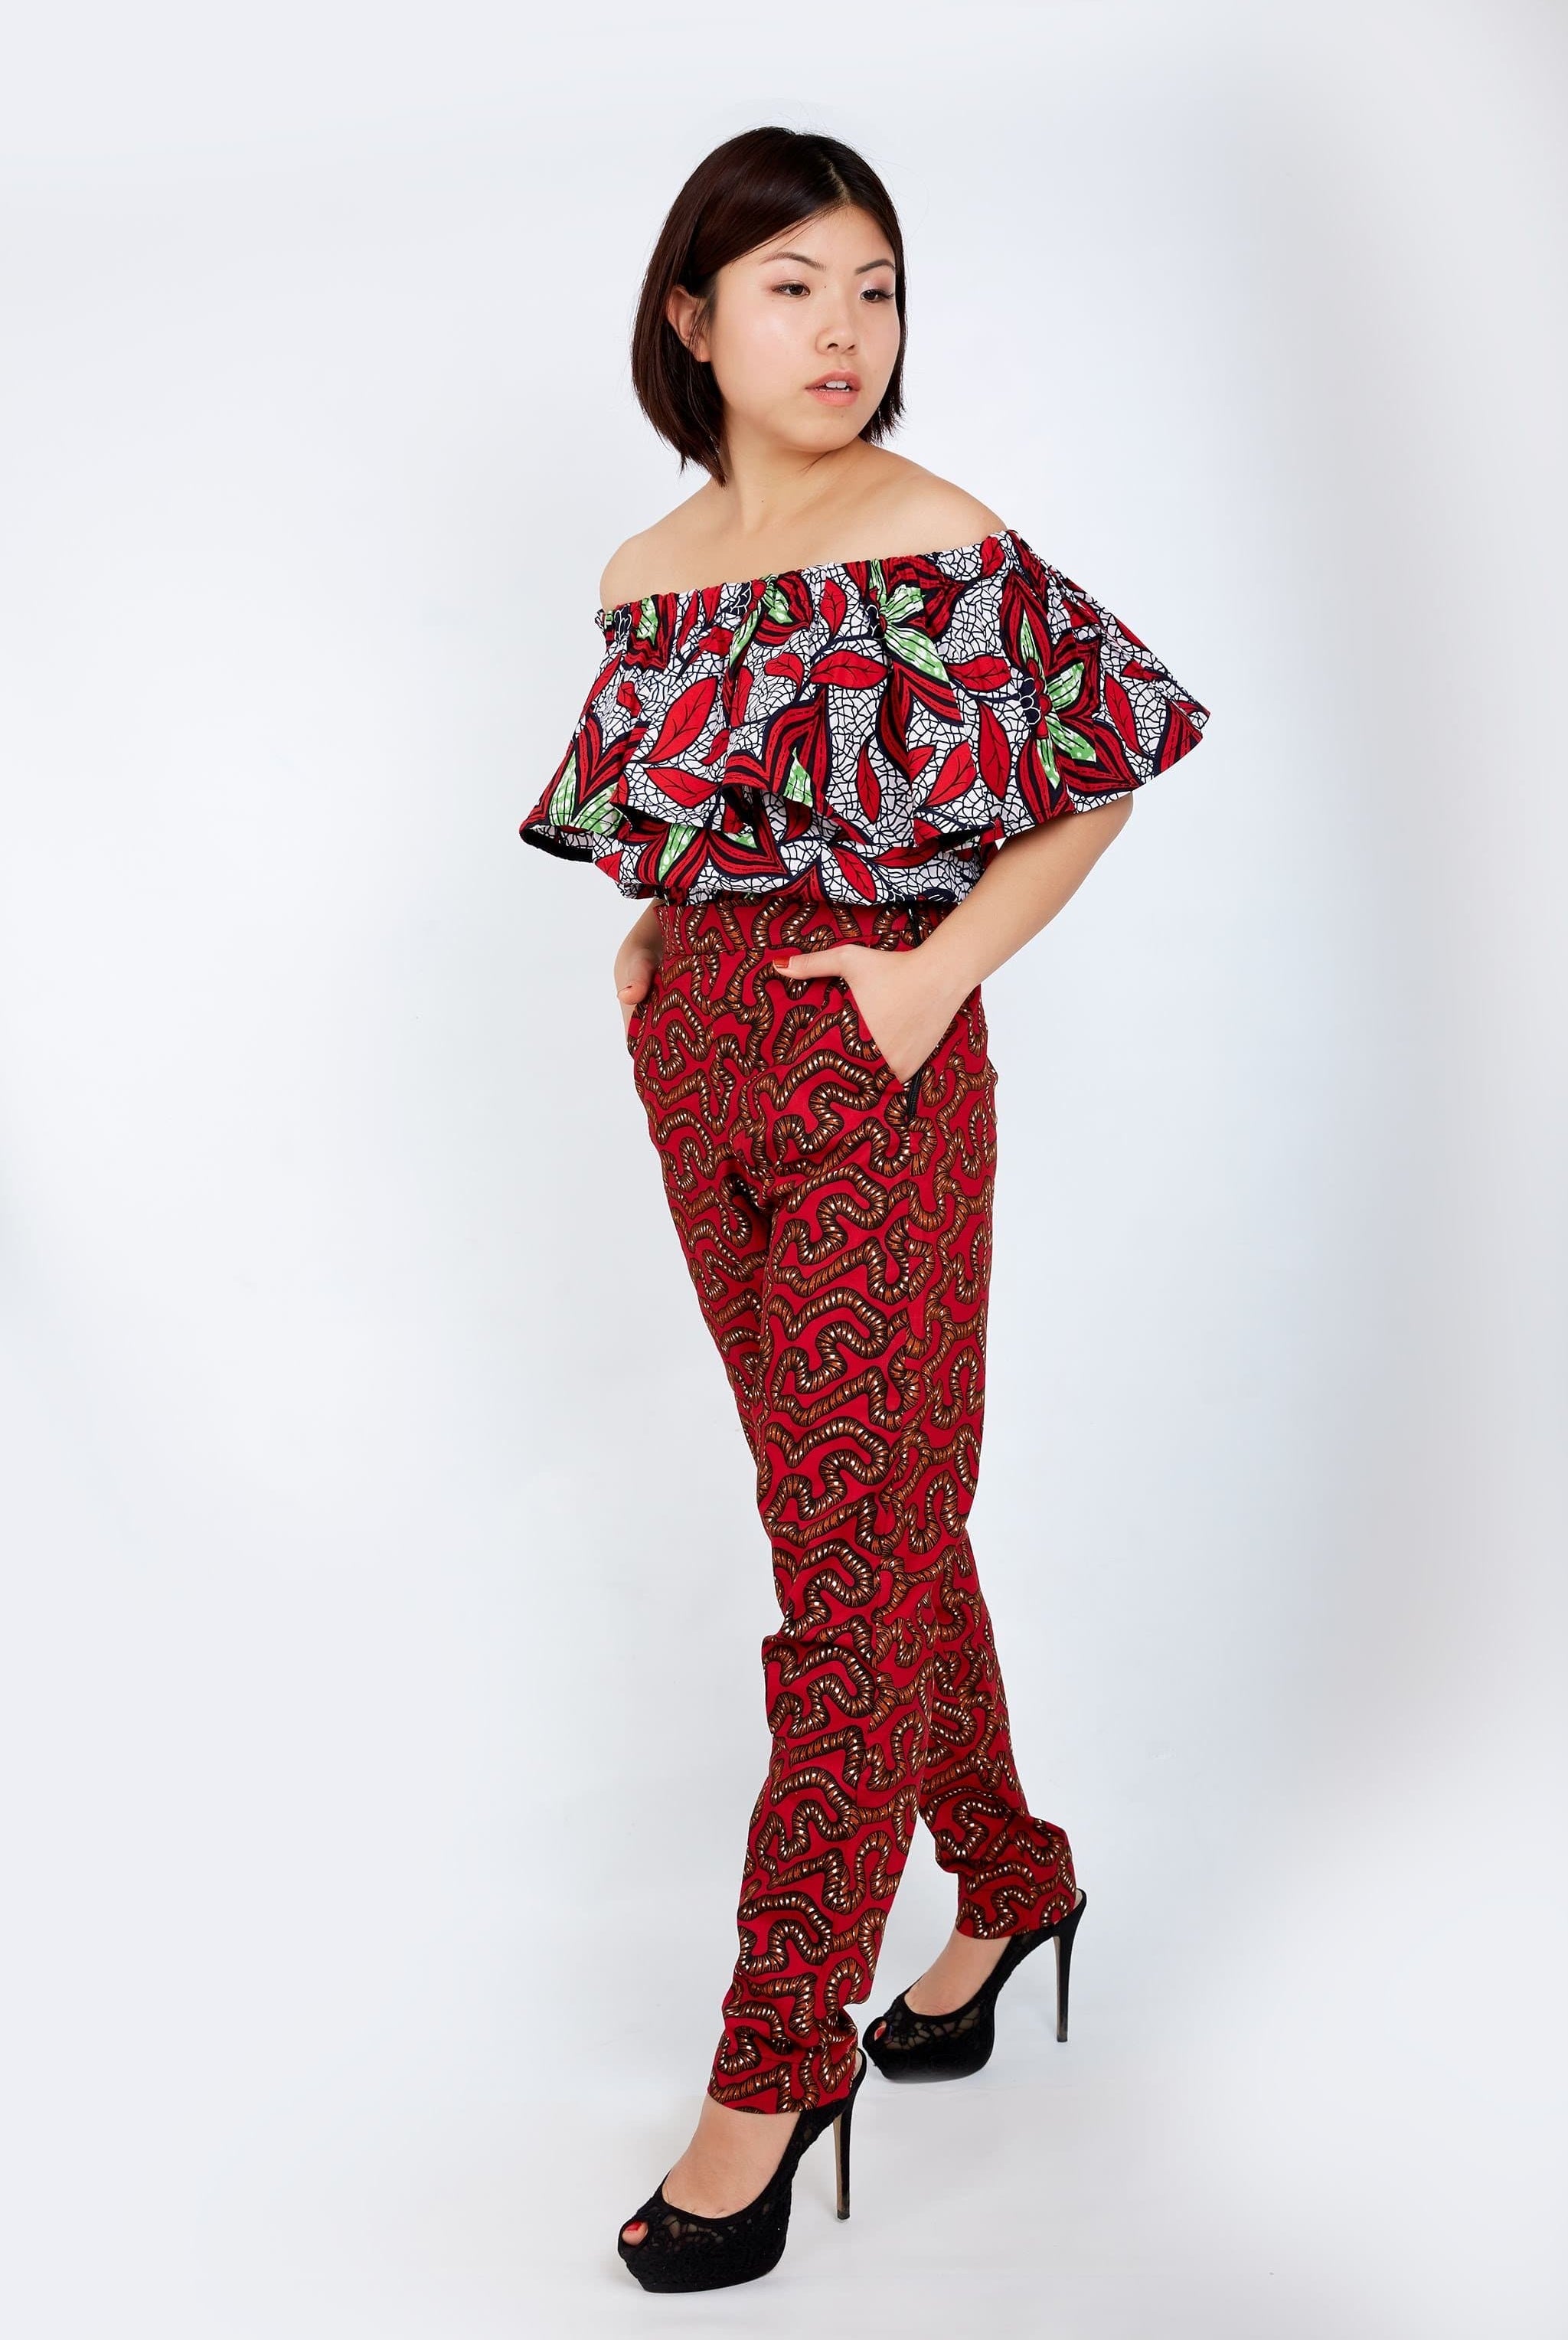 New in - Erikka African Print Ankara Pencil Trousers - African Clothing from CUMO LONDON